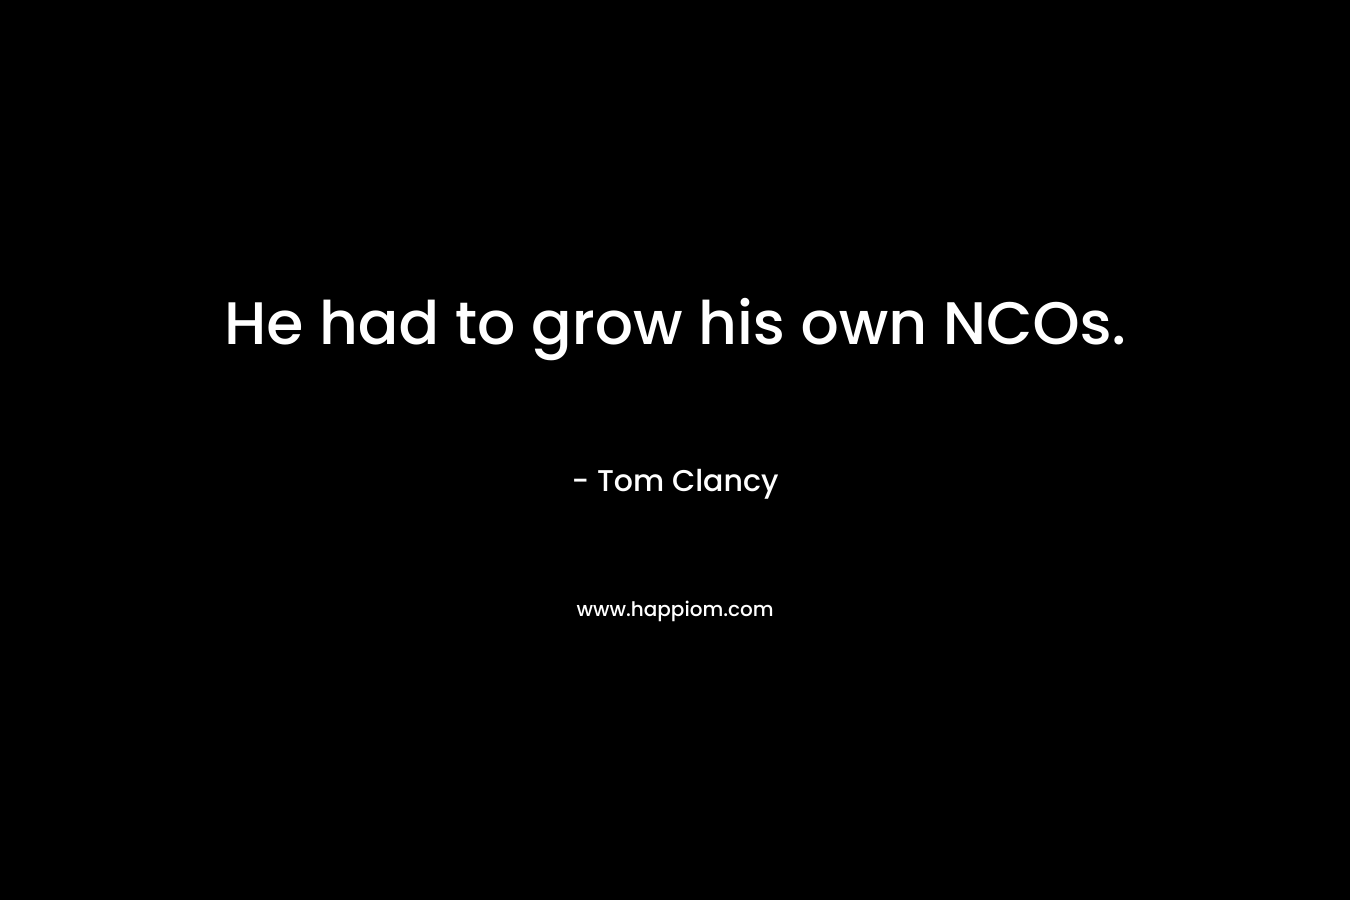 He had to grow his own NCOs. – Tom Clancy